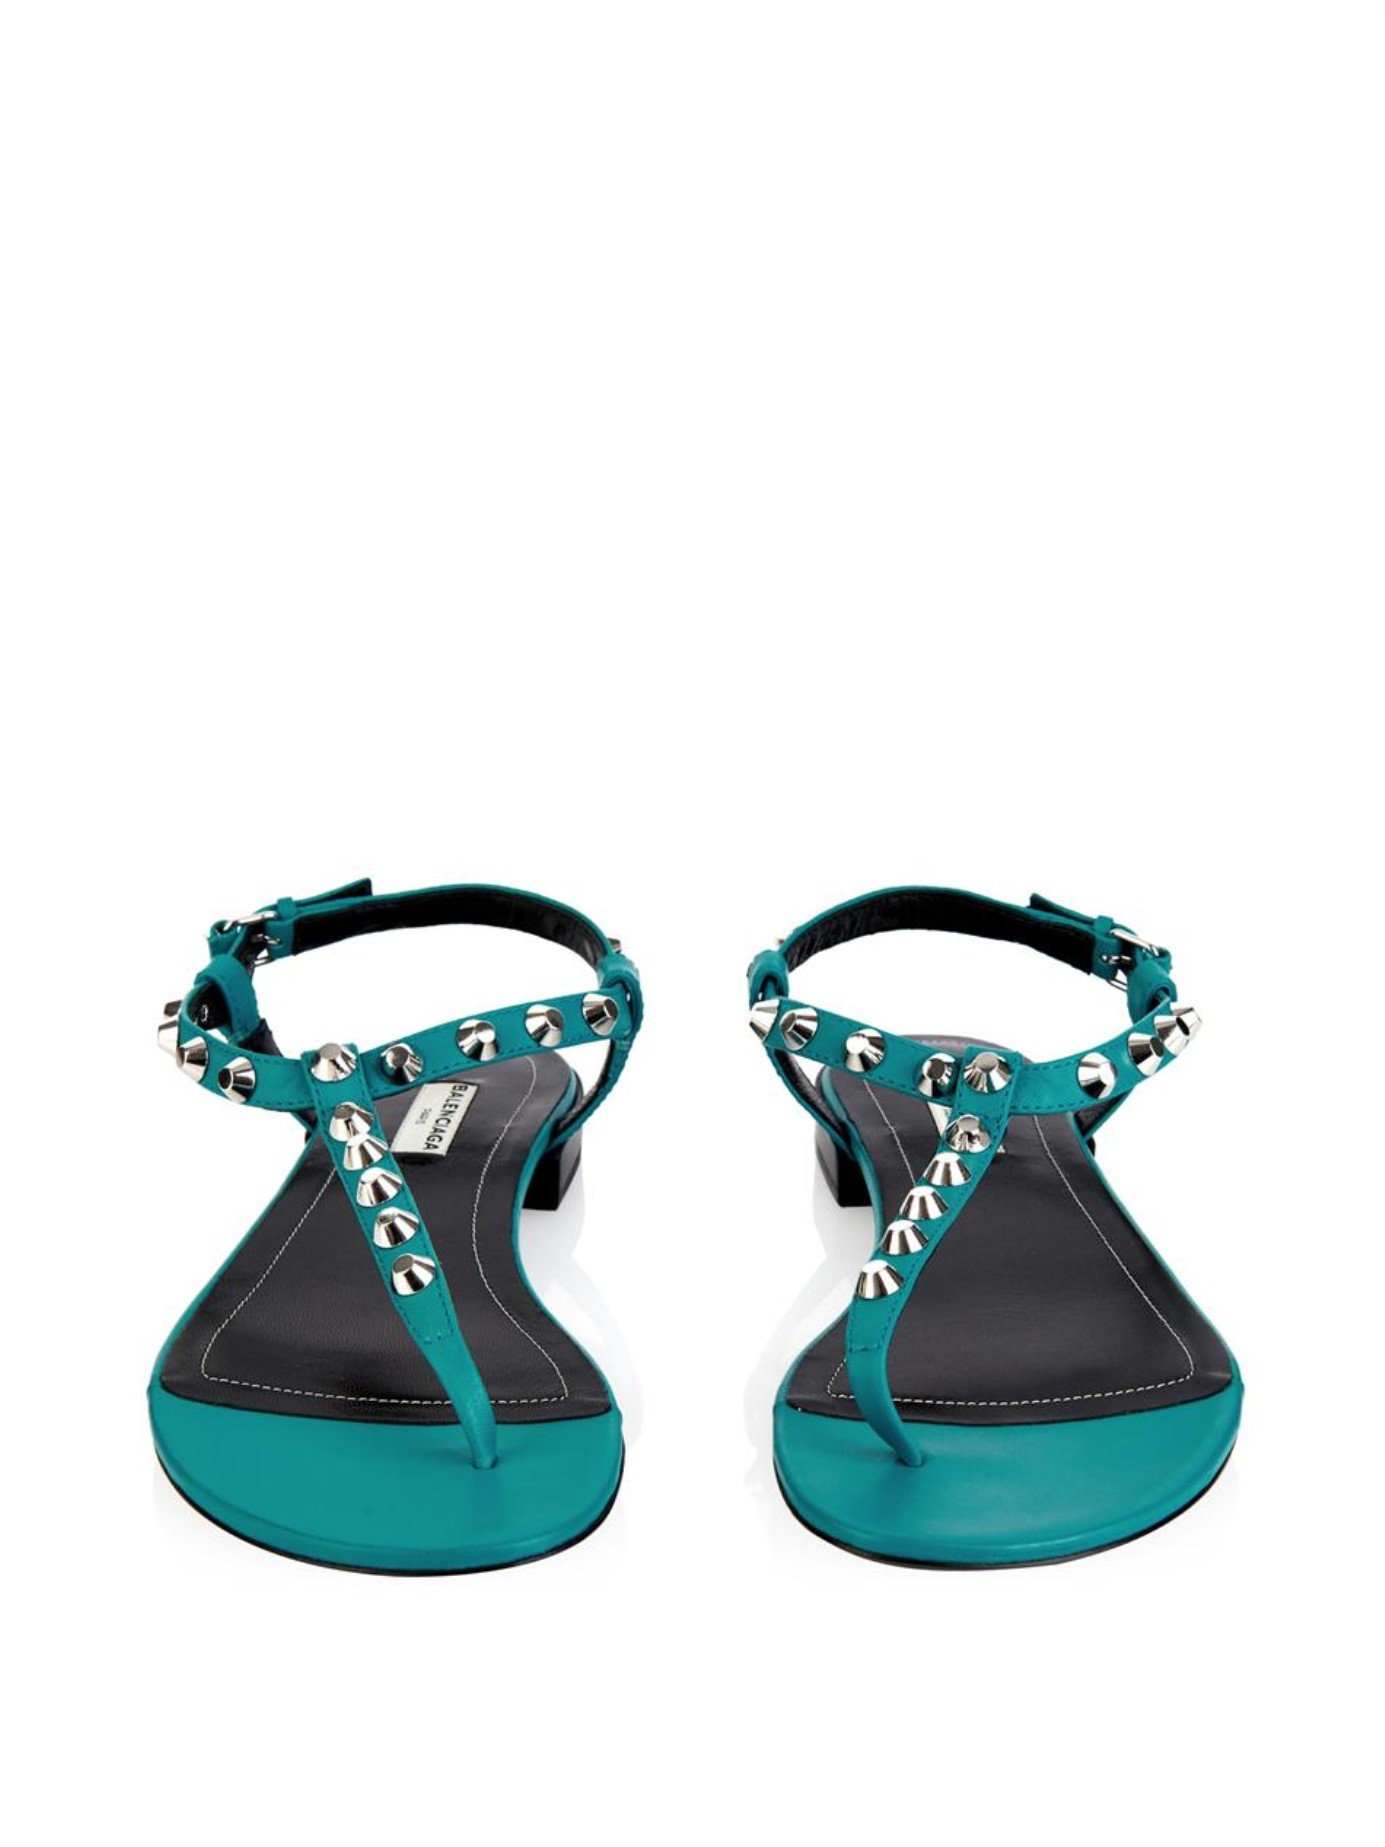 Lyst - Balenciaga Arena Studded Flat Sandals in Blue